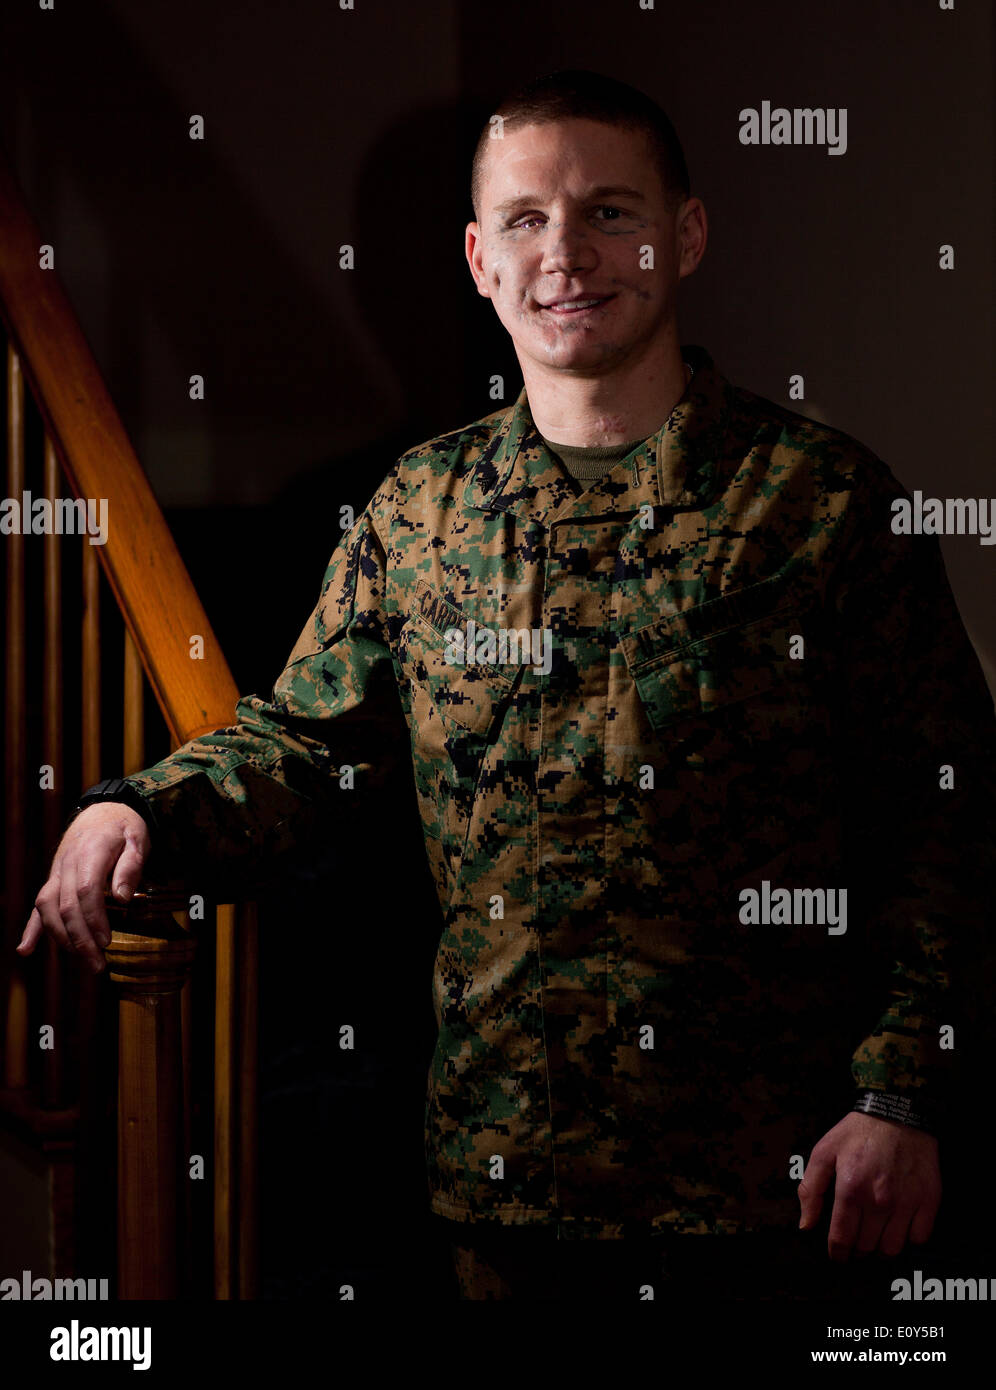 US Marine LCpl Kyle Carpenter portrait during the first corporals course for wounded warriors at the Walter Reed National Military Medical Center January 12, 2012 in Bethesda, Maryland. Carpenter sustained wounds from an enemy grenade in Marjah, Afghanistan will be awarded Medal of Honor for conspicuous gallantry by President Barack Obama in a White House ceremony on June 19, 2014. Stock Photo